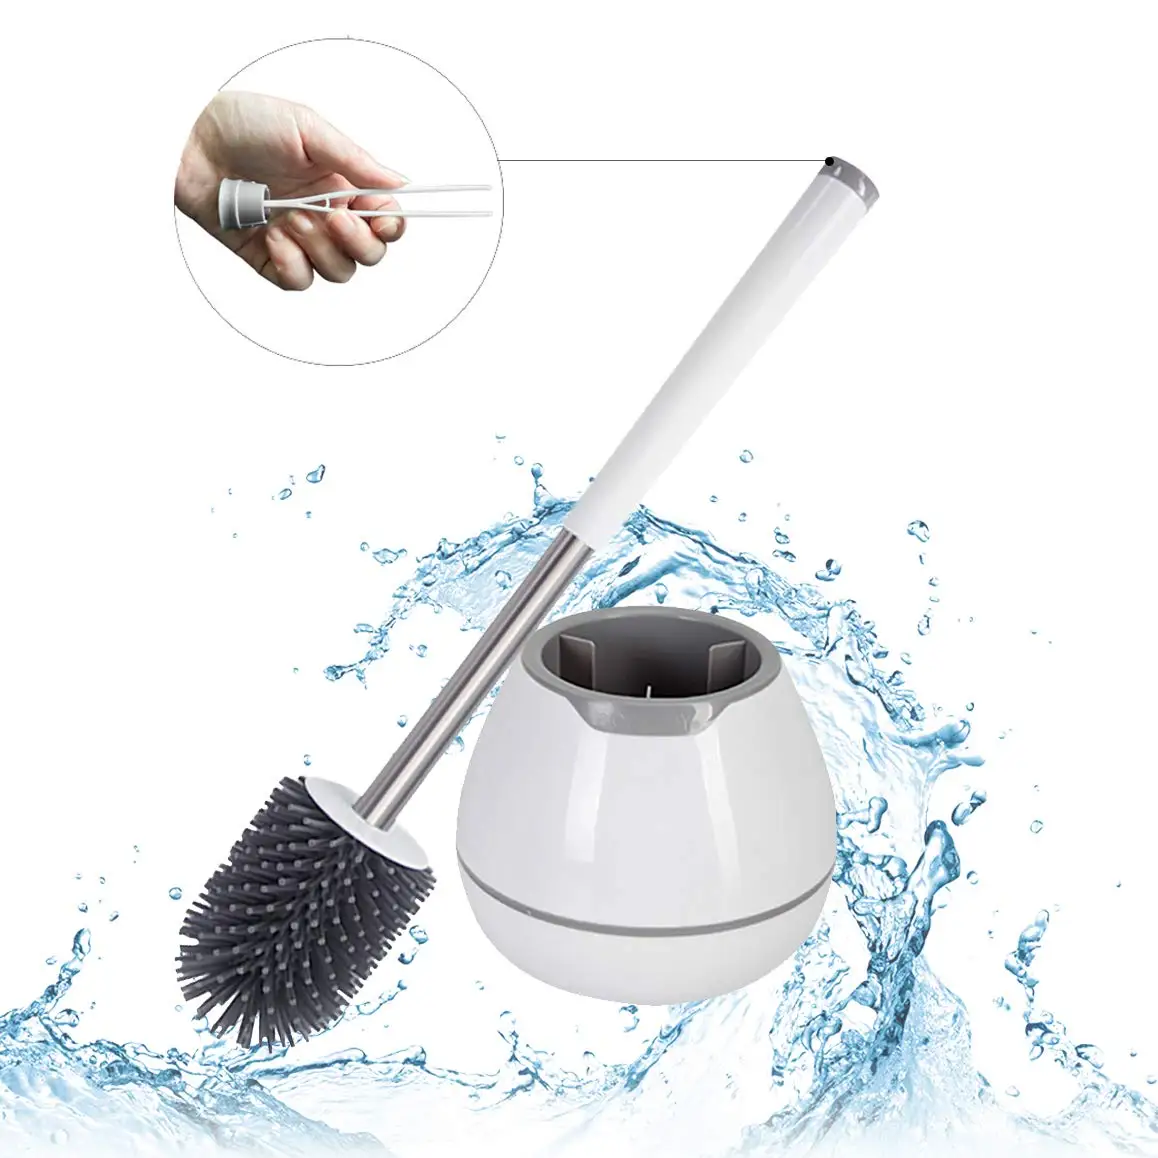 Eyliden TPR Toilet Brush with a Thoughtful Designed Tweezer and Holder Set Silicone Bristles for Bathroom Commode Cleaning